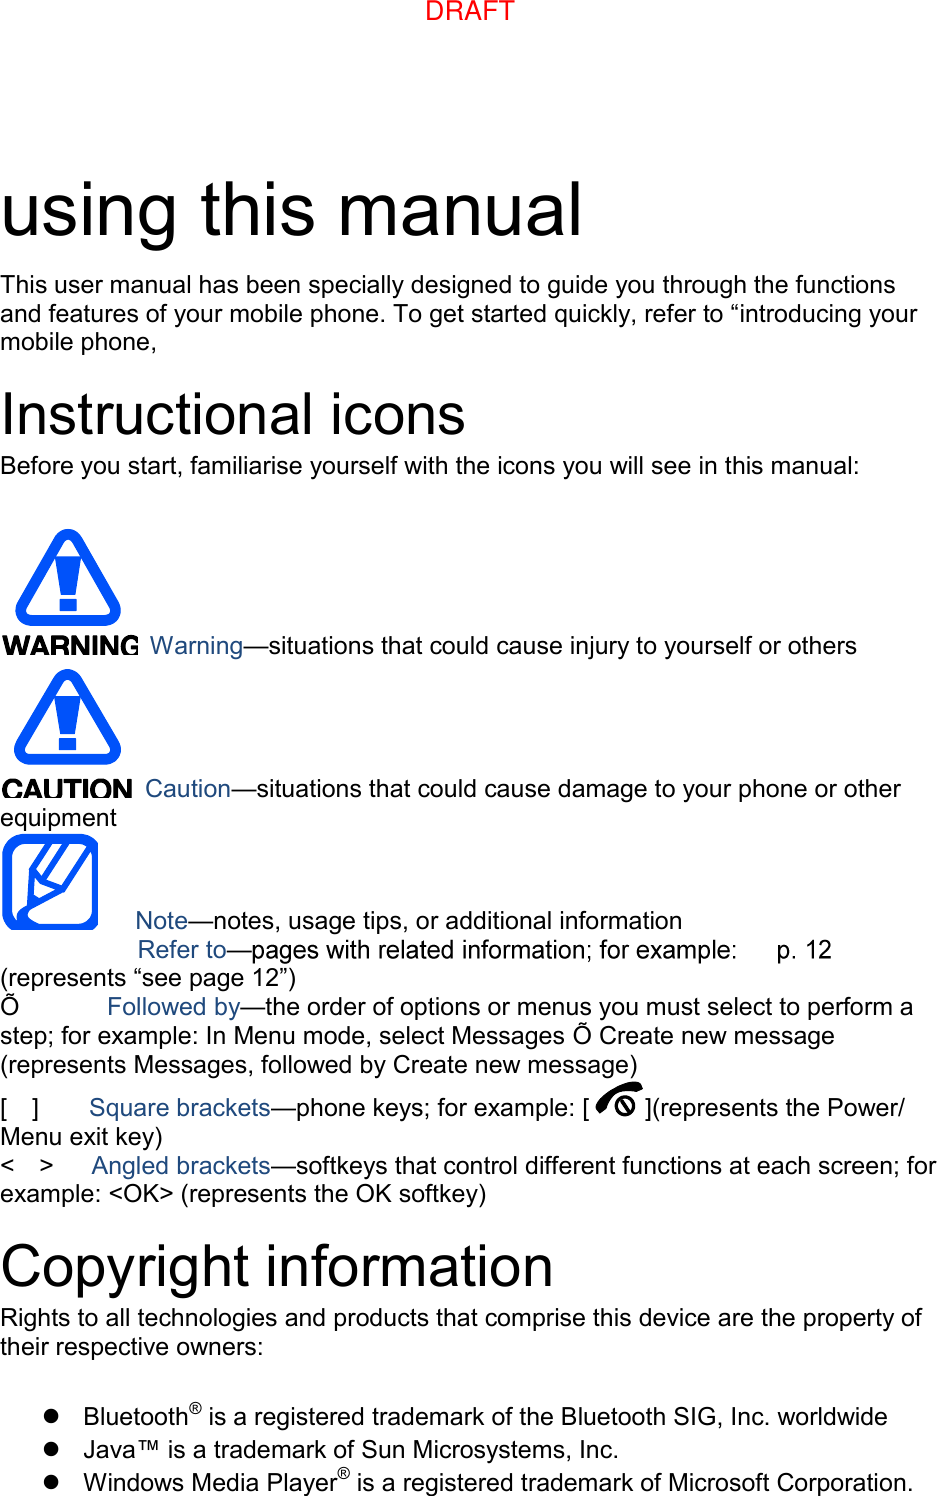 using this manual This user manual has been specially designed to guide you through the functions and features of your mobile phone. To get started quickly, refer to “introducing your mobile phone, Instructional icons Before you start, familiarise yourself with the icons you will see in this manual: Warning—situations that could cause injury to yourself or others Caution—situations that could cause damage to your phone or other equipment Note—notes, usage tips, or additional information     Refer to—(represents “see page 12”) Õ      Followed by—the order of options or menus you must select to perform a step; for example: In Menu mode, select Messages Õ Create new message (represents Messages, followed by Create new message) [    ]    Square brackets—phone keys; for example: [ ](represents the Power/ Menu exit key) &lt;    &gt;    Angled brackets—softkeys that control different functions at each screen; for example: &lt;OK&gt; (represents the OK softkey) Copyright information Rights to all technologies and products that comprise this device are the property of their respective owners: Bluetooth® is a registered trademark of the Bluetooth SIG, Inc. worldwideJava™ is a trademark of Sun Microsystems, Inc.Windows Media Player® is a registered trademark of Microsoft Corporation.DRAFT